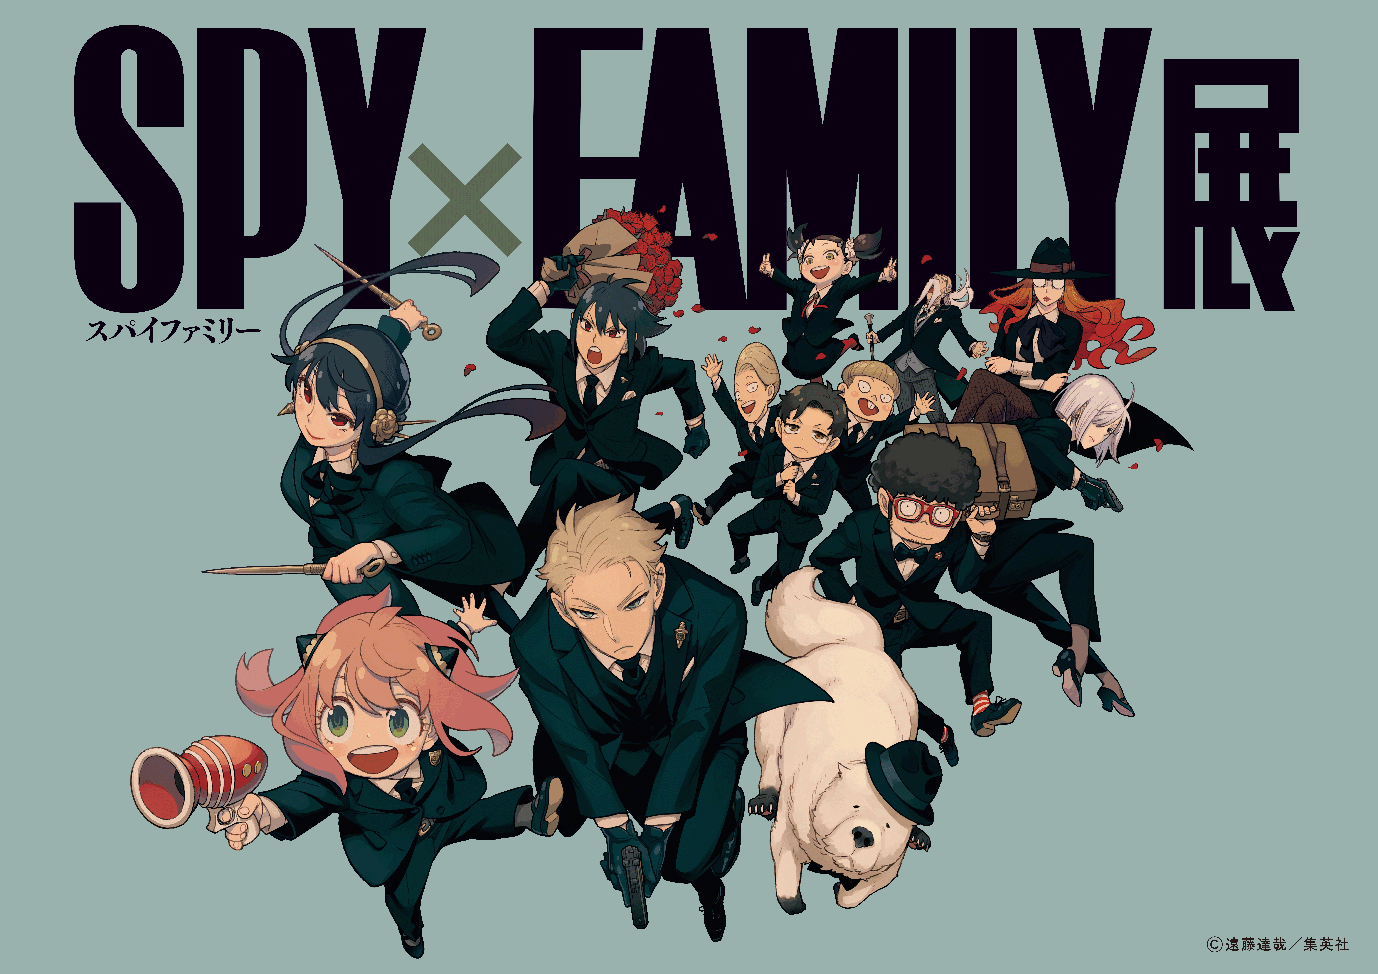 Spy x Family Part 2 Set To Air In October